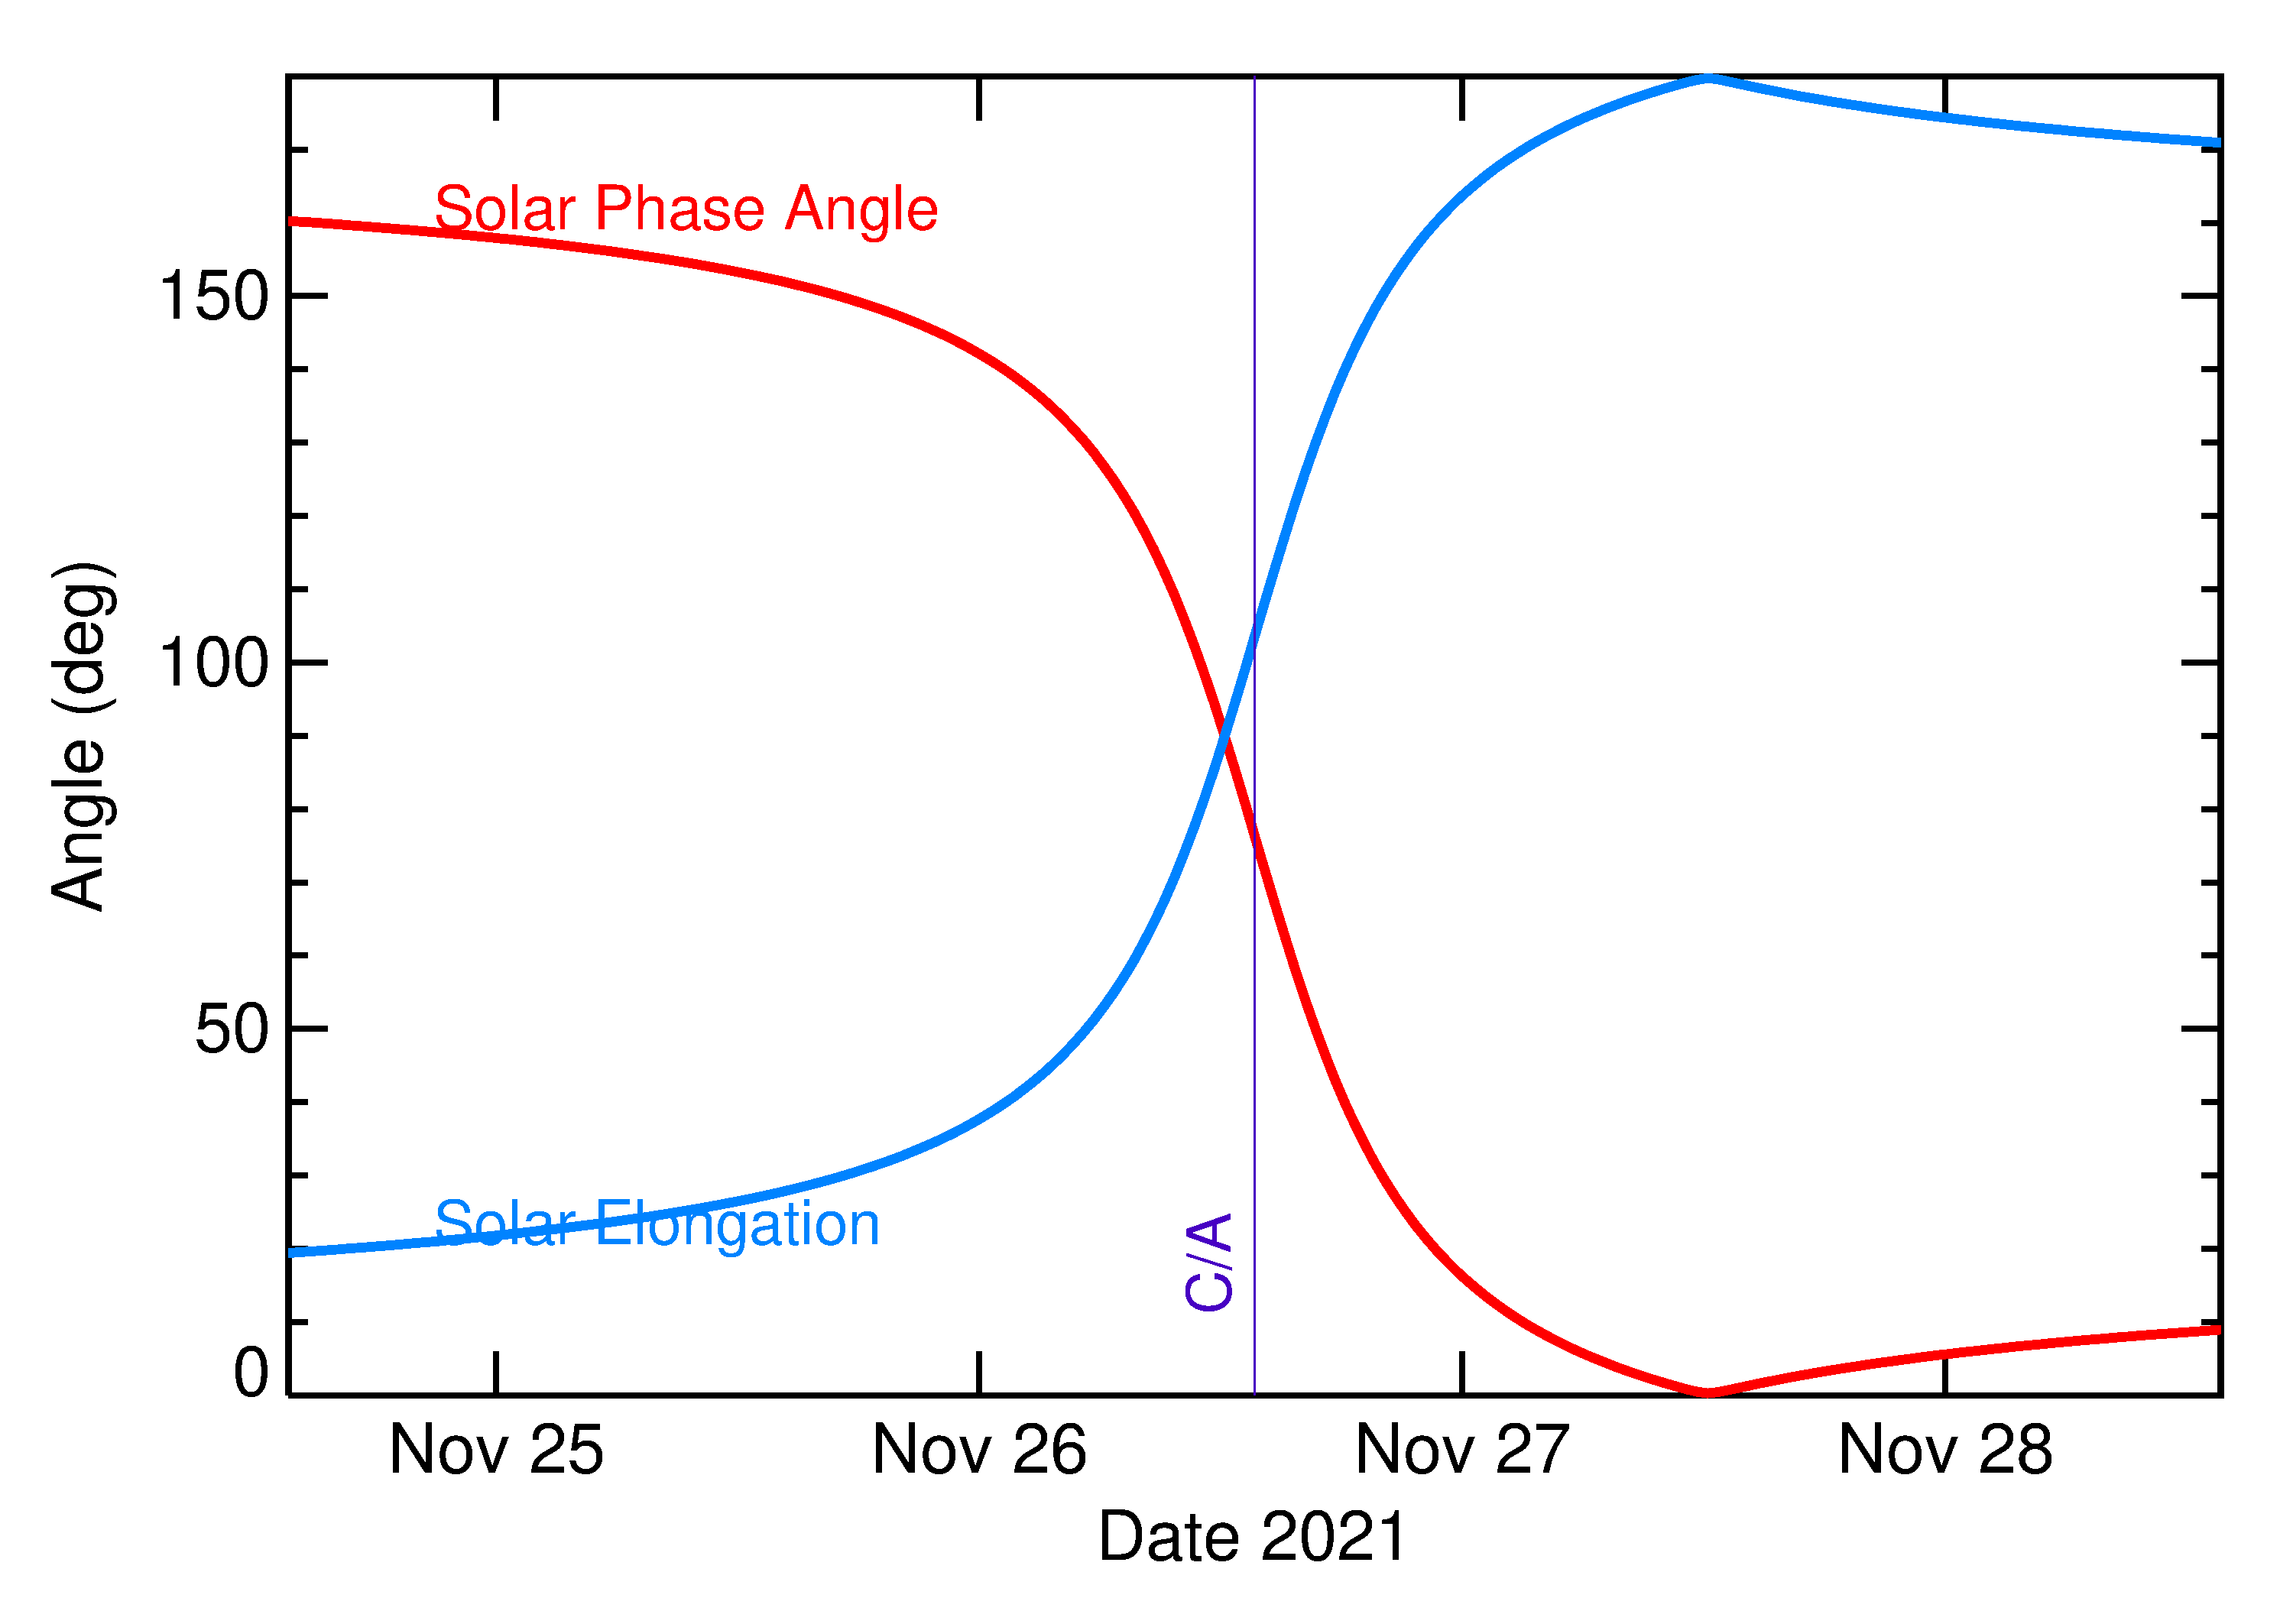 Solar Elongation and Solar Phase Angle of 2021 WA1 in the days around closest approach